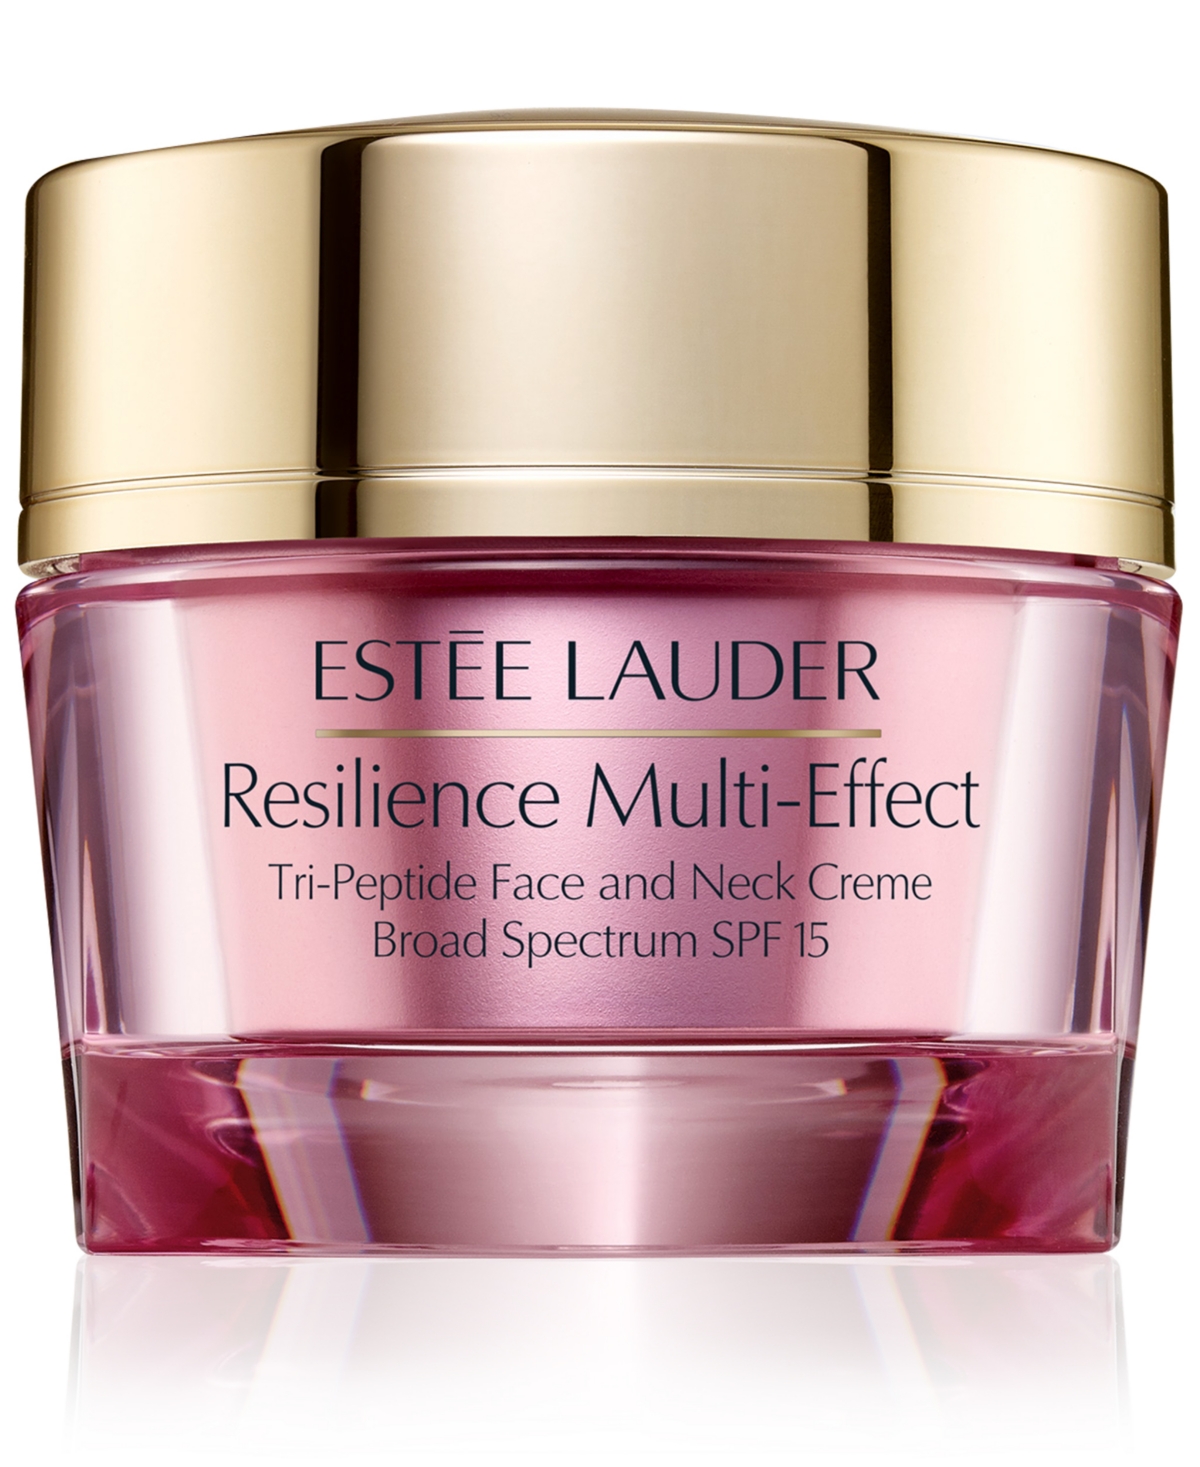 Resilience Multi-Effect Tri-Peptide Face and Neck Moisturizer Creme Spf 15 - Normal/Combination Skin, 1.7-oz.